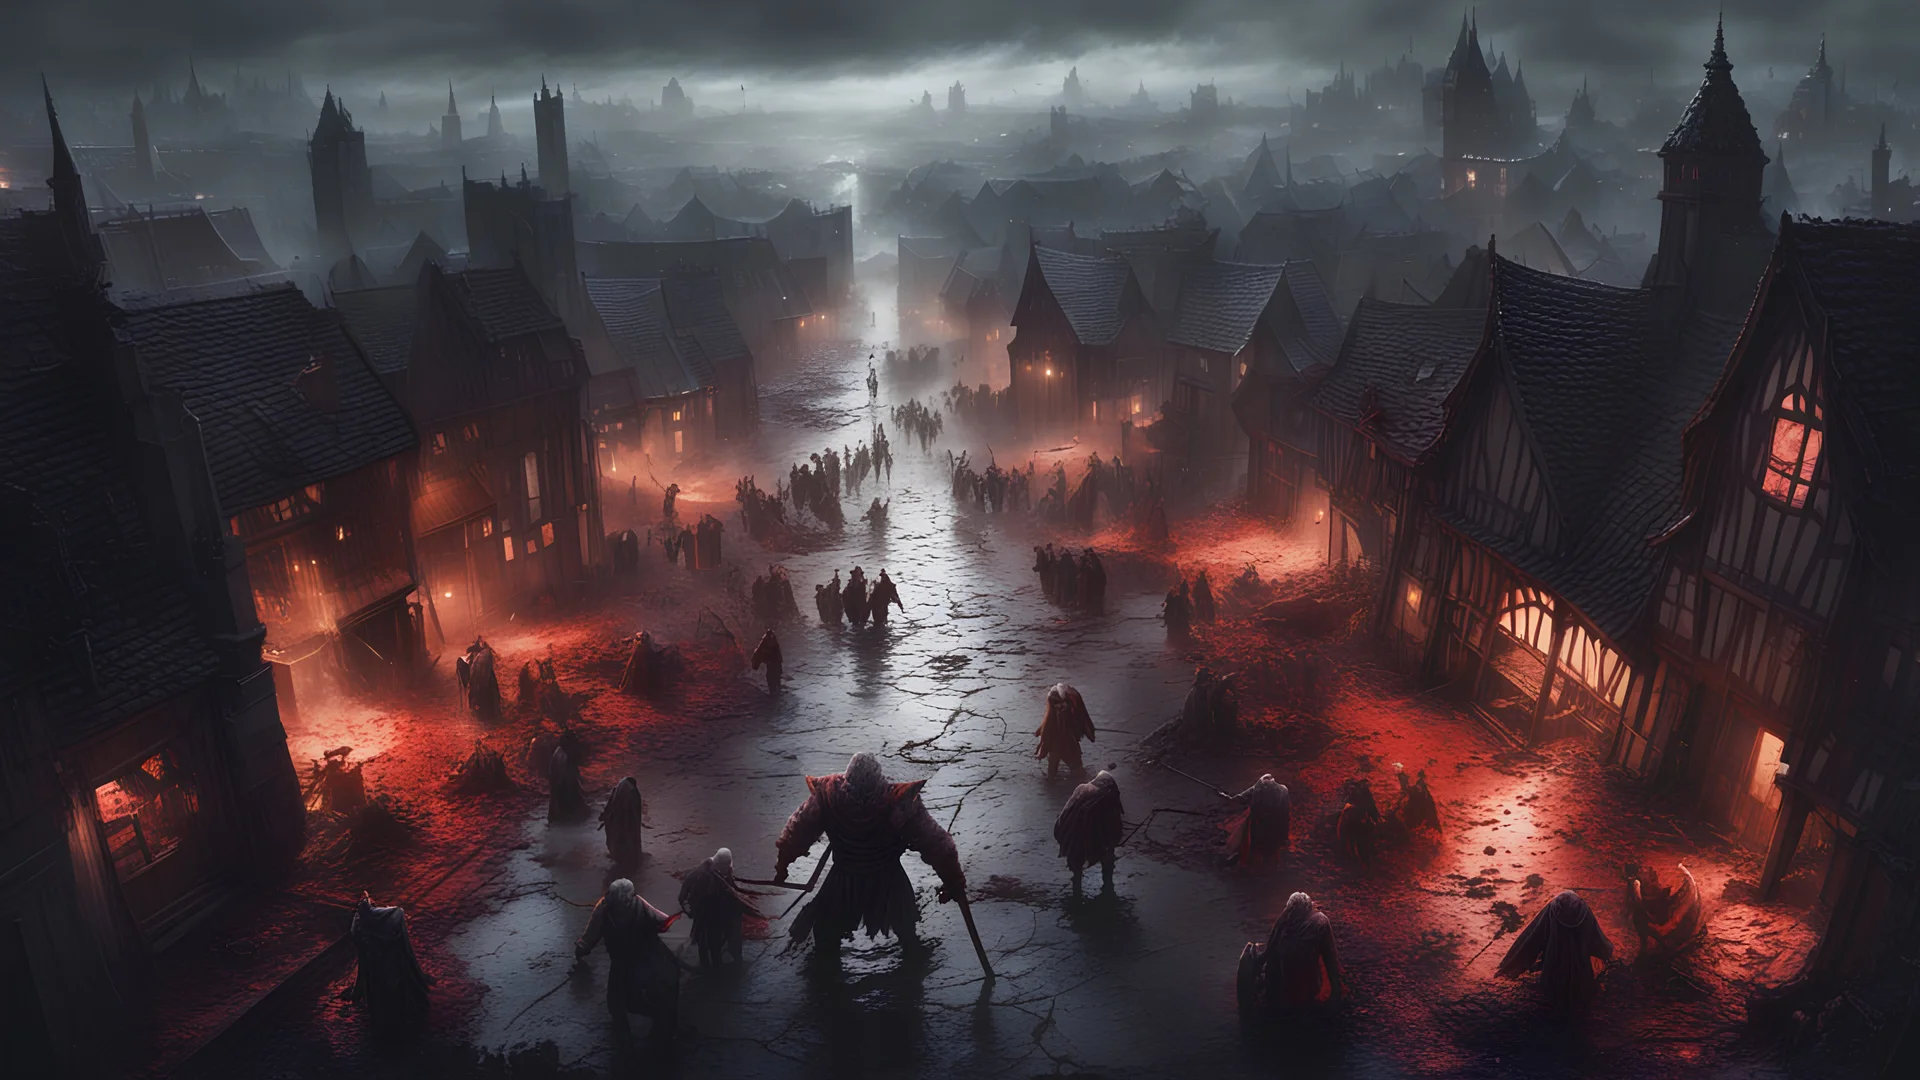 superperspective, birds eye view. Tall White Orcs plundering a medieval town at night. Orcs killing and abducting humans. Covered in blood. puddles of blood in the streets. Brutal scenery, menacing, threatening.